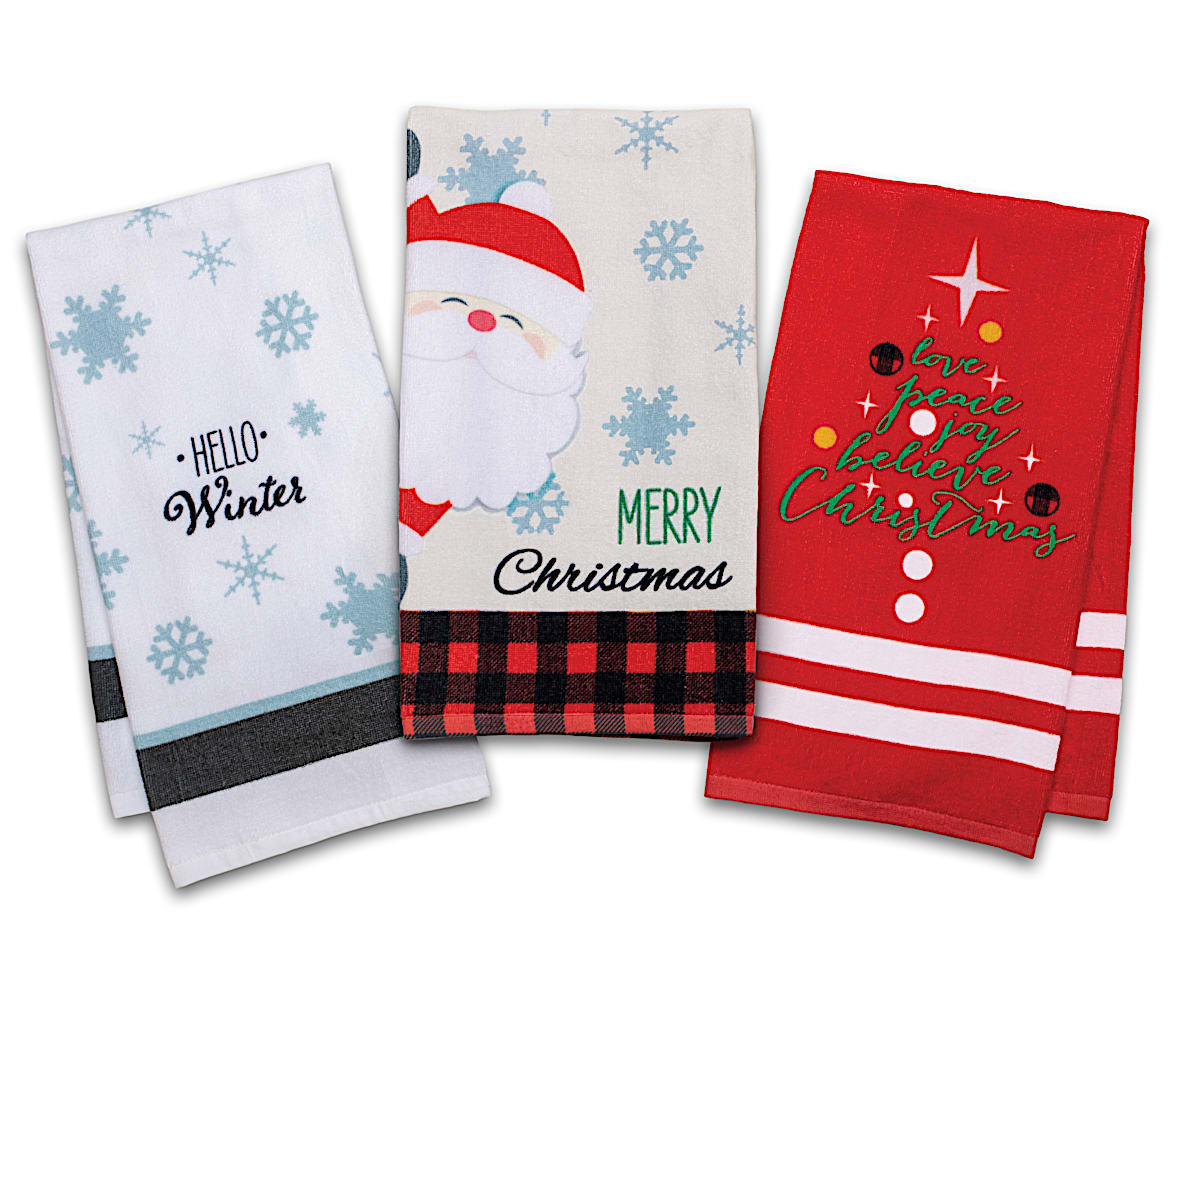 Serving Up Fun Collection Of 100% Cotton 3-Piece Hand Towel Sets That  Measure 13 x 31 And Feature Different Seasonal Designs